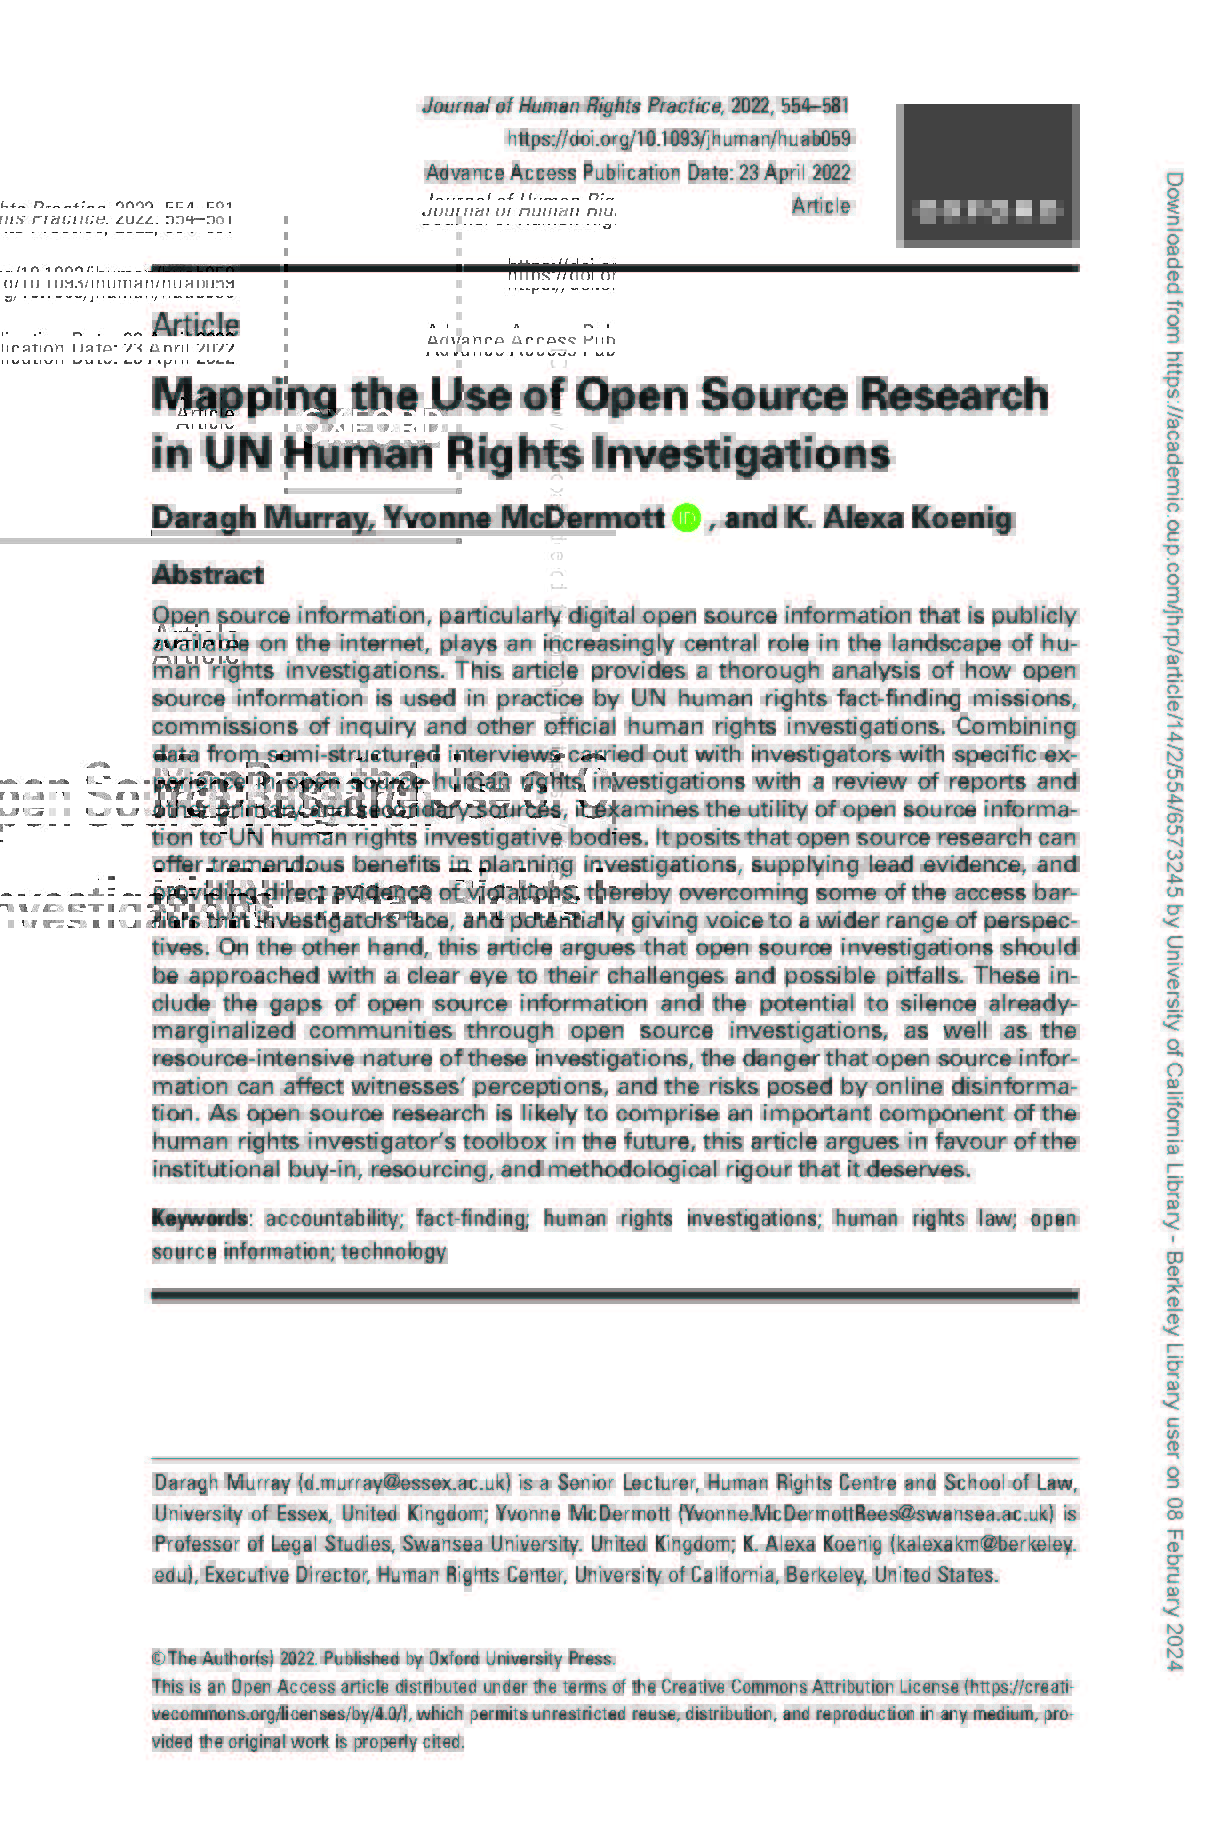 Pages from Mapping the Use of Open Source Research in UN Human Rights Investigation